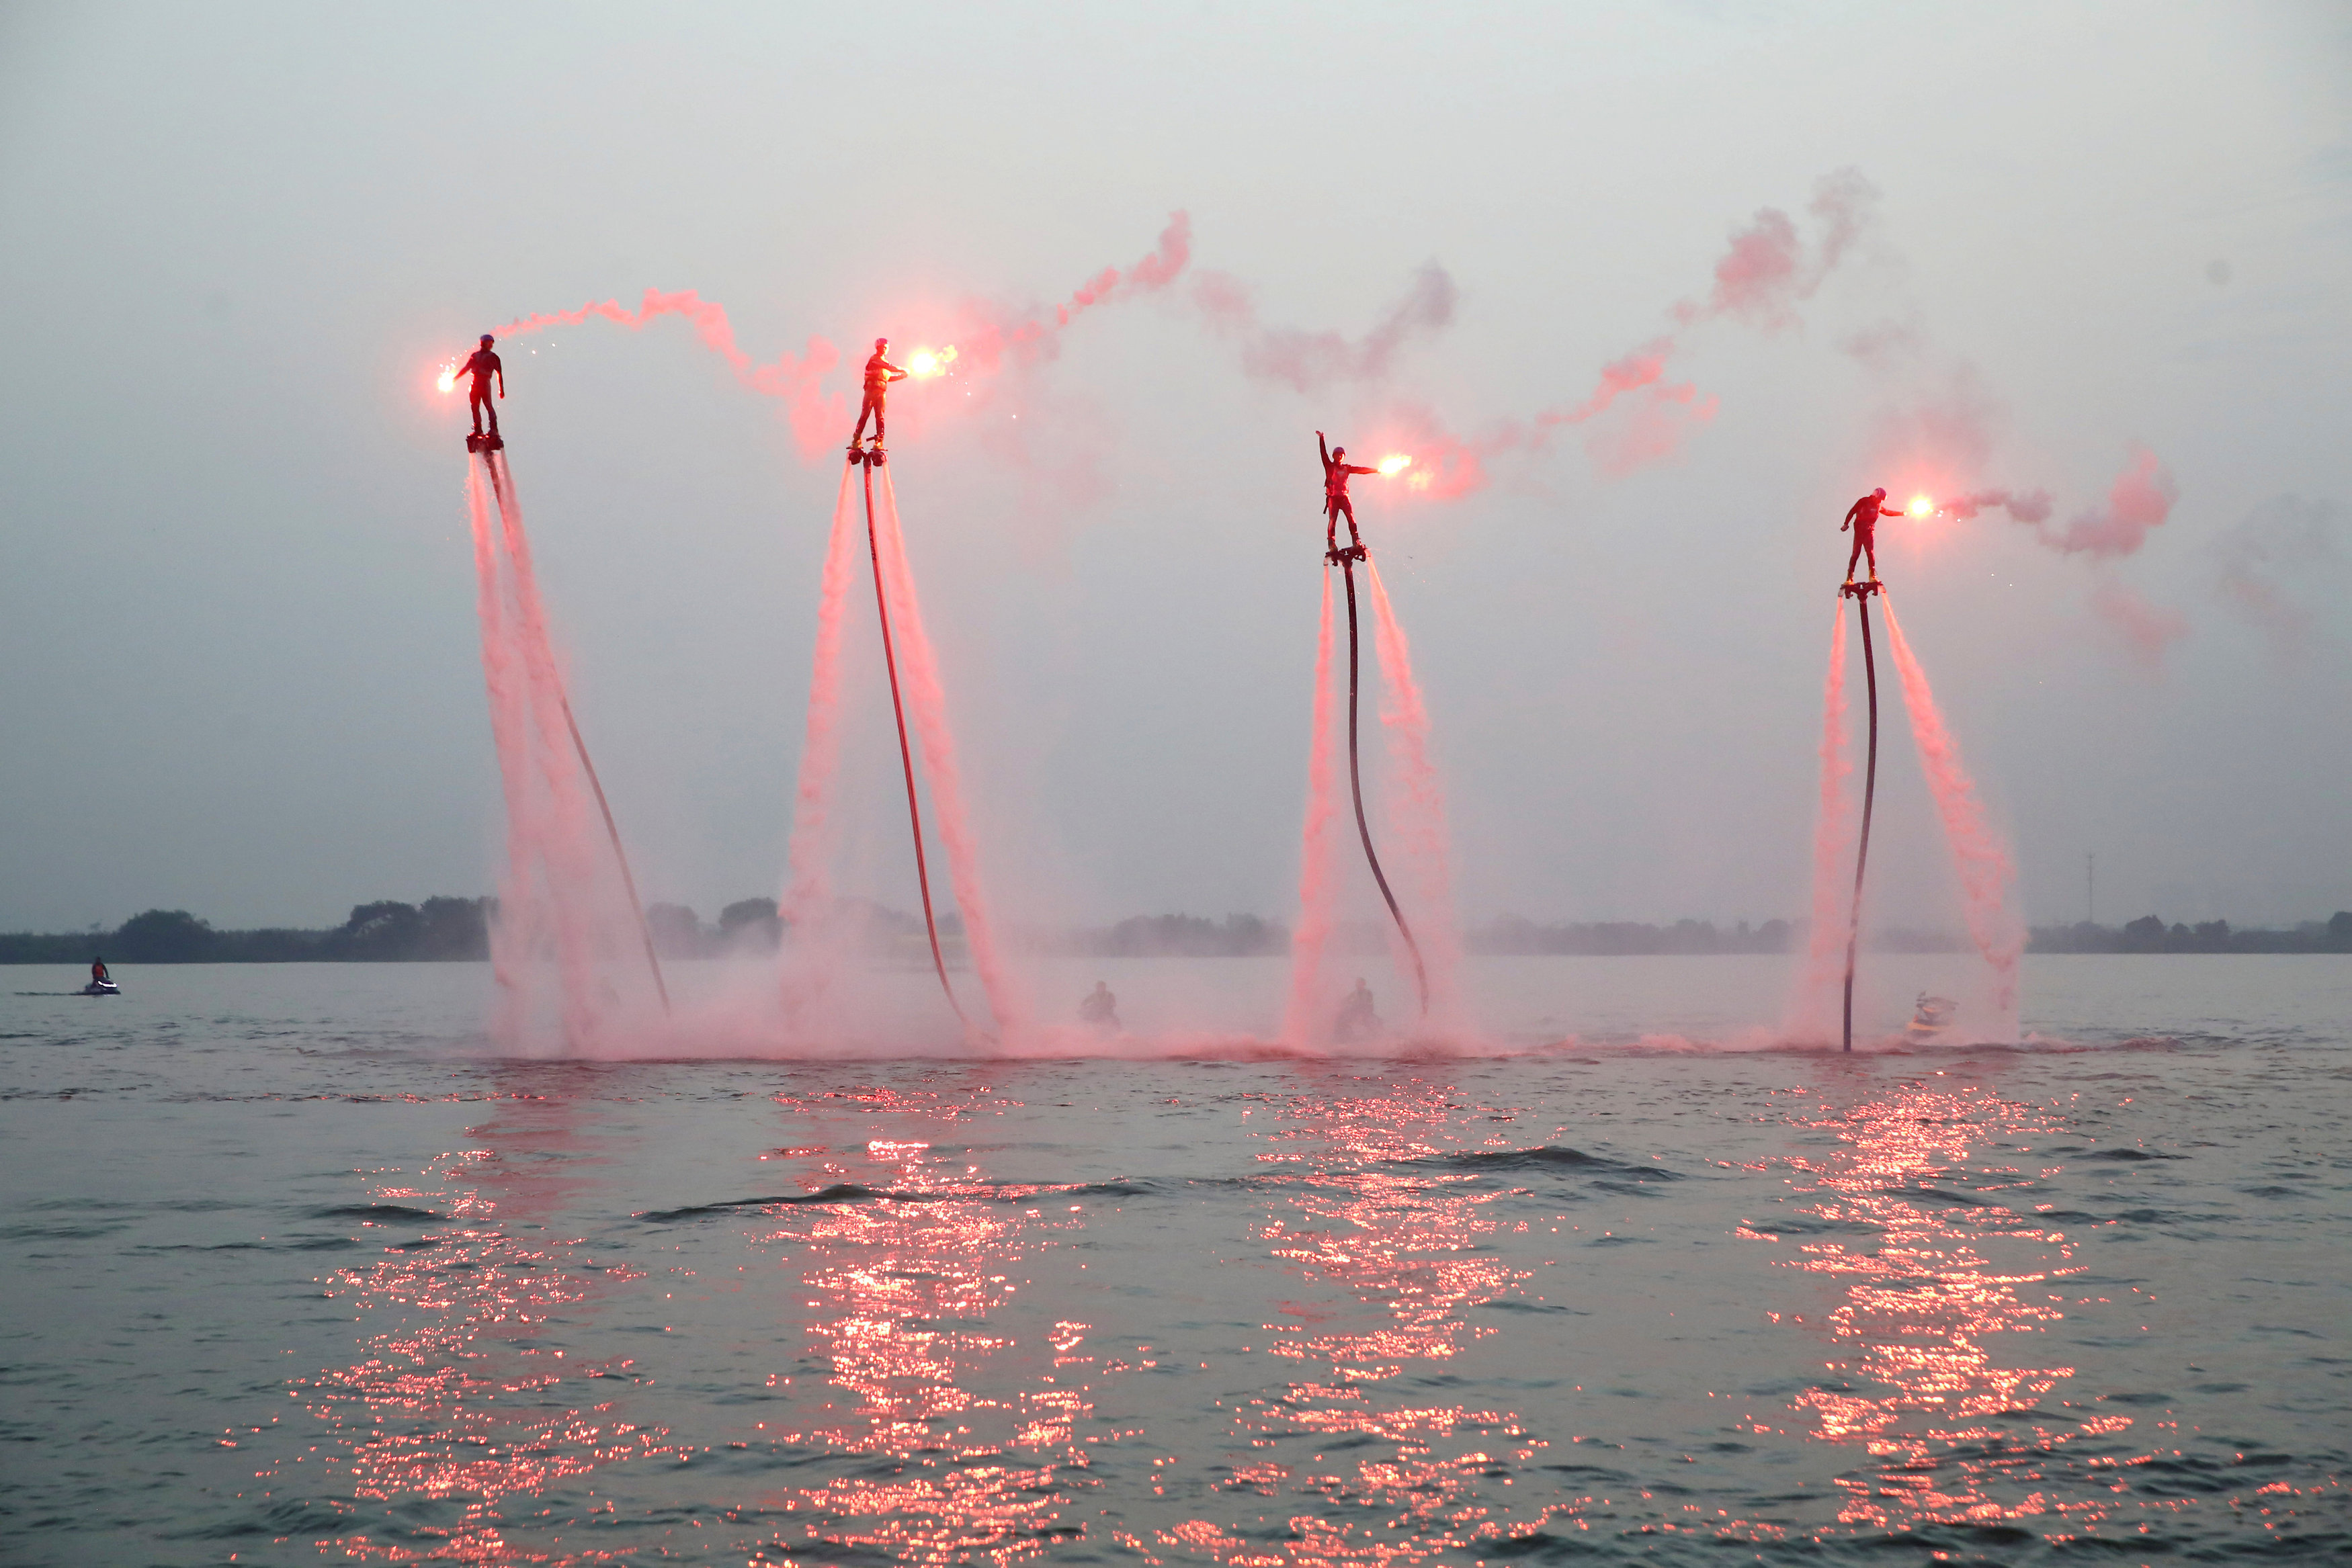 People riding on water-powered jet-boards perform in Yixing, Jiangsu province, China, October 17, 2016. Picture taken October 17, 2016. REUTERS/Stringer ATTENTION EDITORS - THIS IMAGE WAS PROVIDED BY A THIRD PARTY. EDITORIAL USE ONLY. CHINA OUT. NO COMMERCIAL OR EDITORIAL SALES IN CHINA.